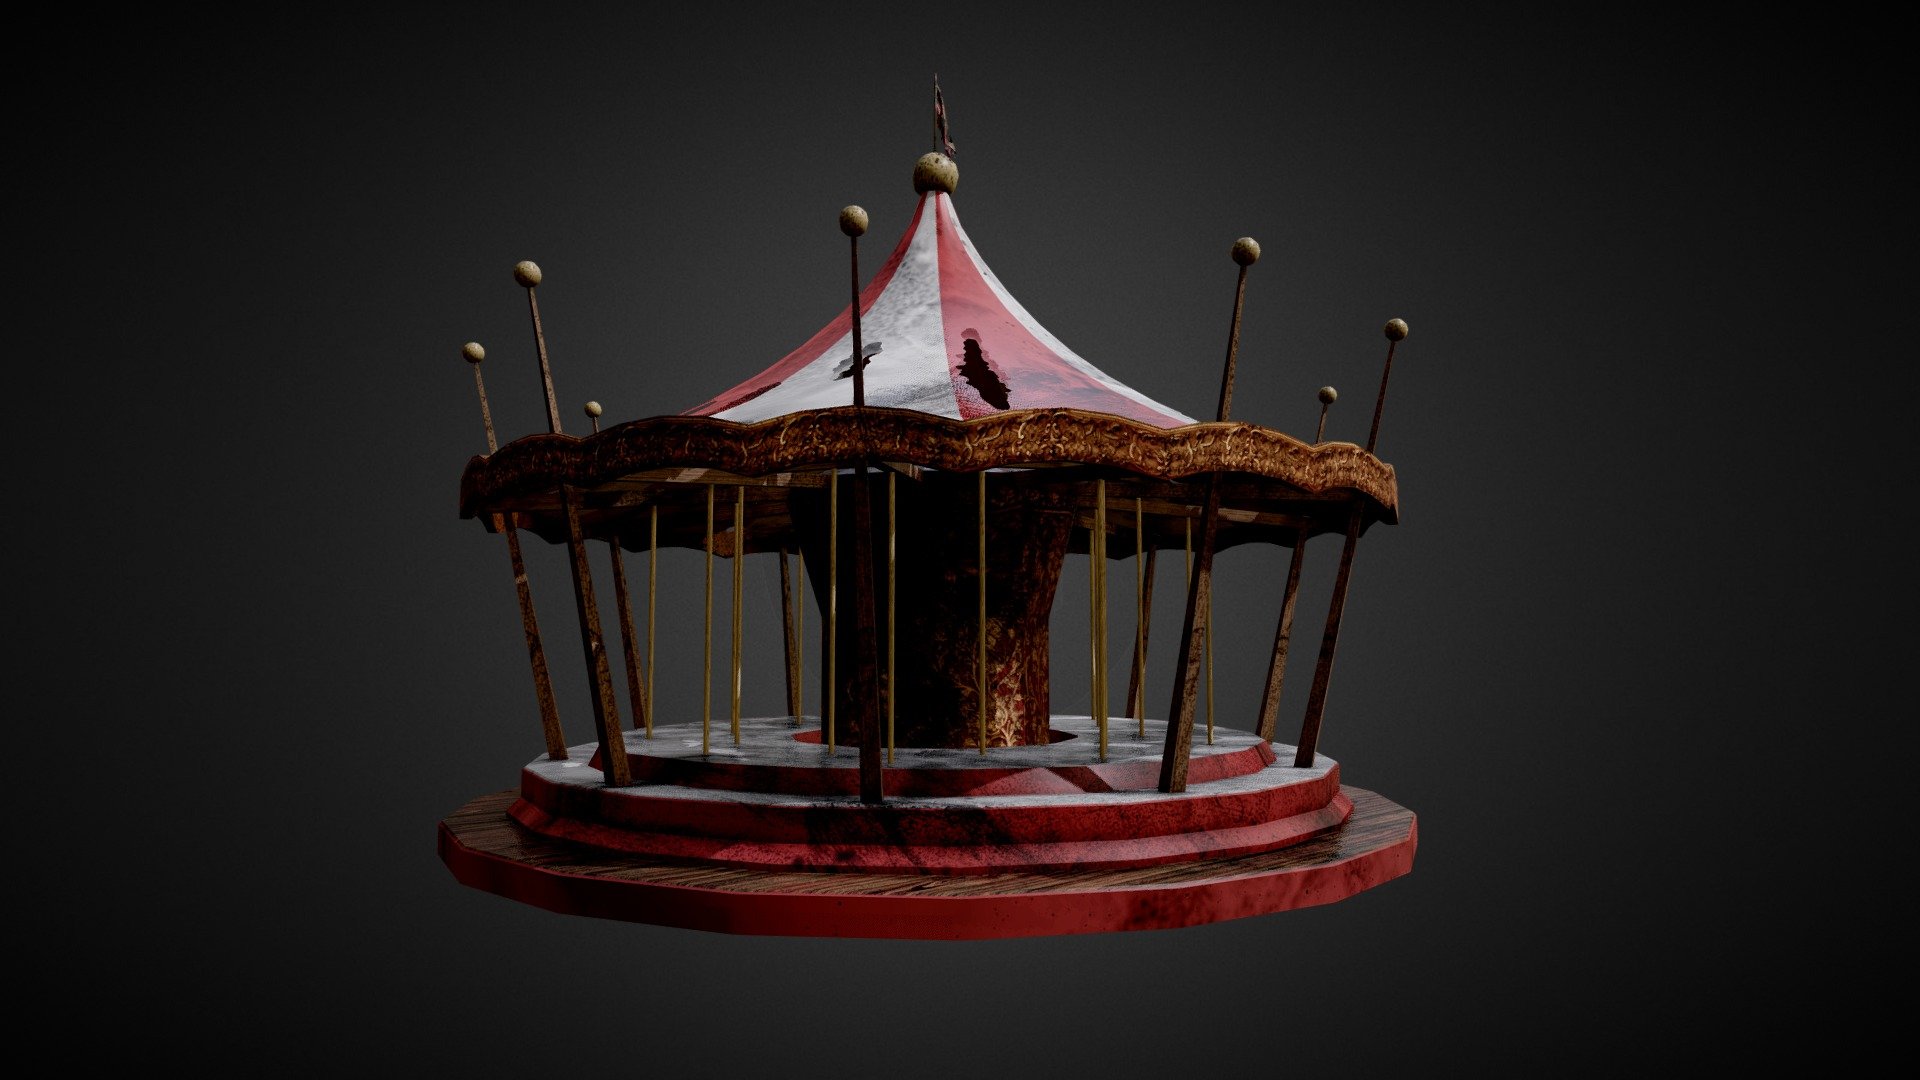 This is the damaged version of a carousel that I made for a Unity WebGL game a while back. The game is a 3rd person perspective, educational game and all rides are meant to be ridable after &lsquo;fixing' them, hence why there's a damaged, and a new version of the ride. This also meant that the rides needed to be fully animatable and look as good as possible from close up despite limitations. 
Three of the main limitations were:
1. Poly count was required to be below 10000 per ride
2. Only a diffuse map was allowed
3. The only way to convey difference between a damaged and repaired ride was by replacing the diffuse map (no model changes allowed)

NOTE: 
- Carousel animals from the Unity asset store were used. However, I haven't included these in order to better showcase my personal contribution to the project
- The flag has a significantly higher poly density than the rest of the model, this is because cloth physics were used to animate it.
- Textures from both textures.com and Poliigon were used - Carousel - Damaged - 3D model by Kkye 3d model